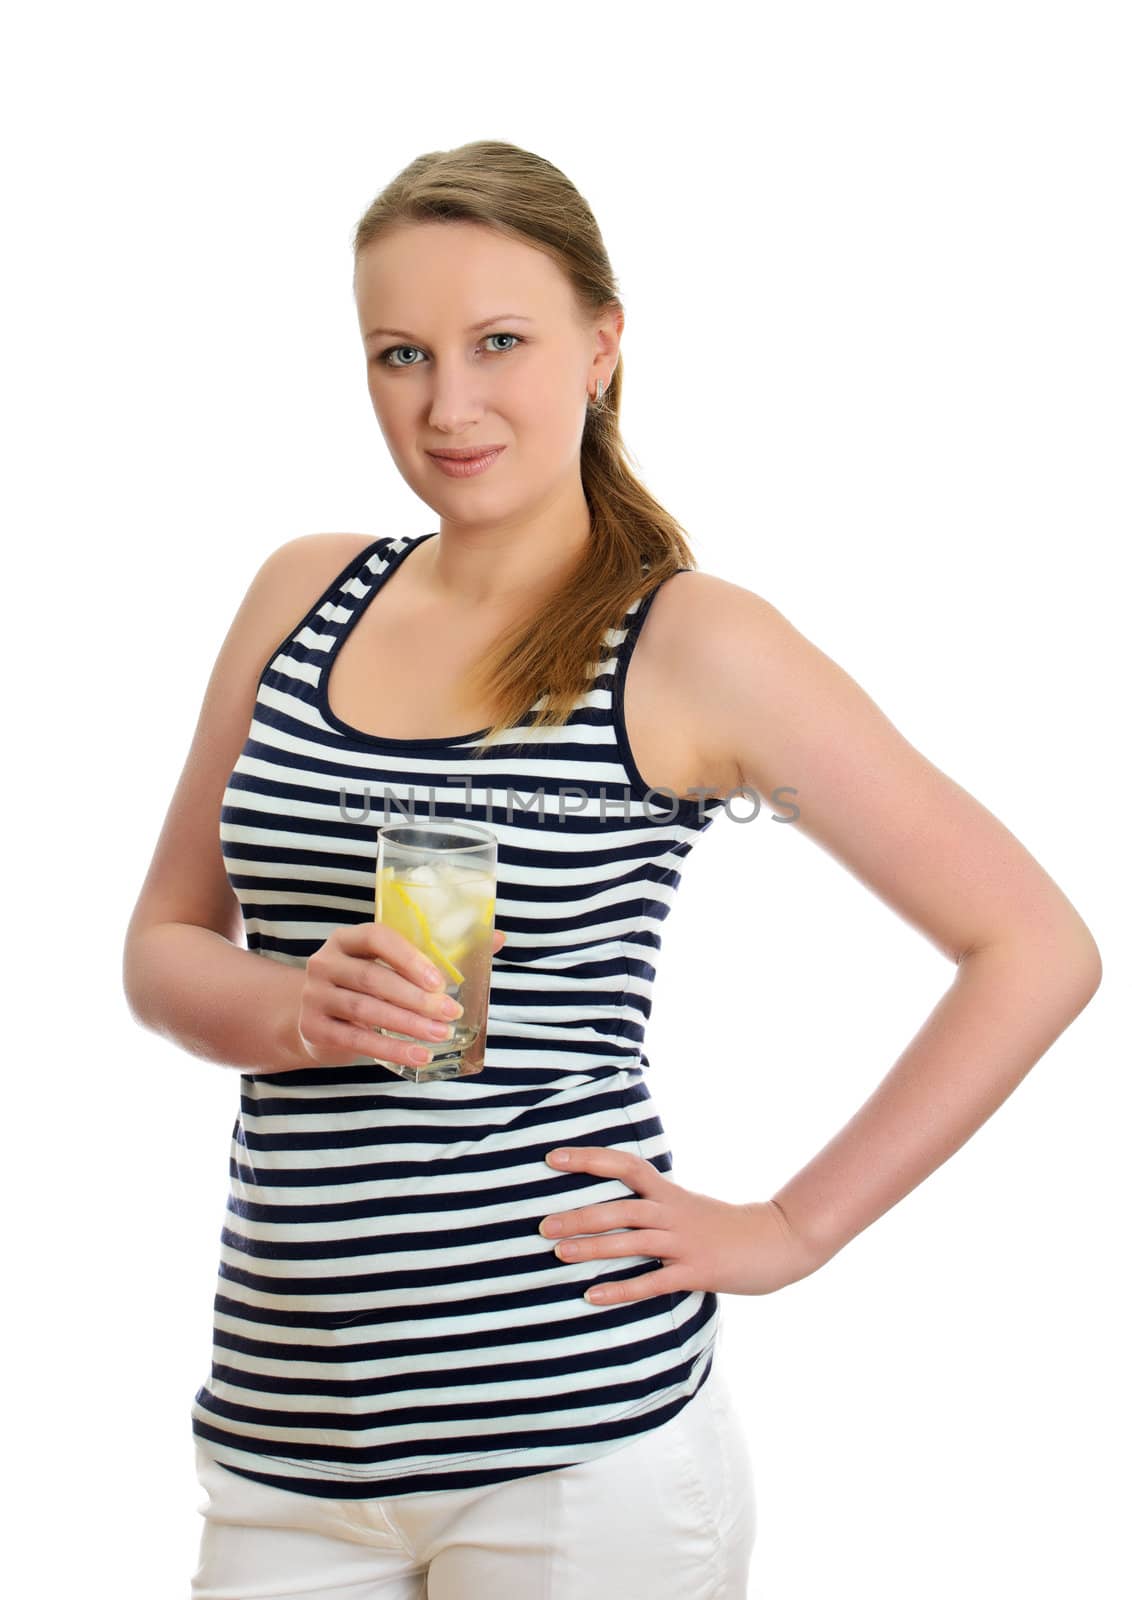 Attractive woman with glass of water, isolated on white